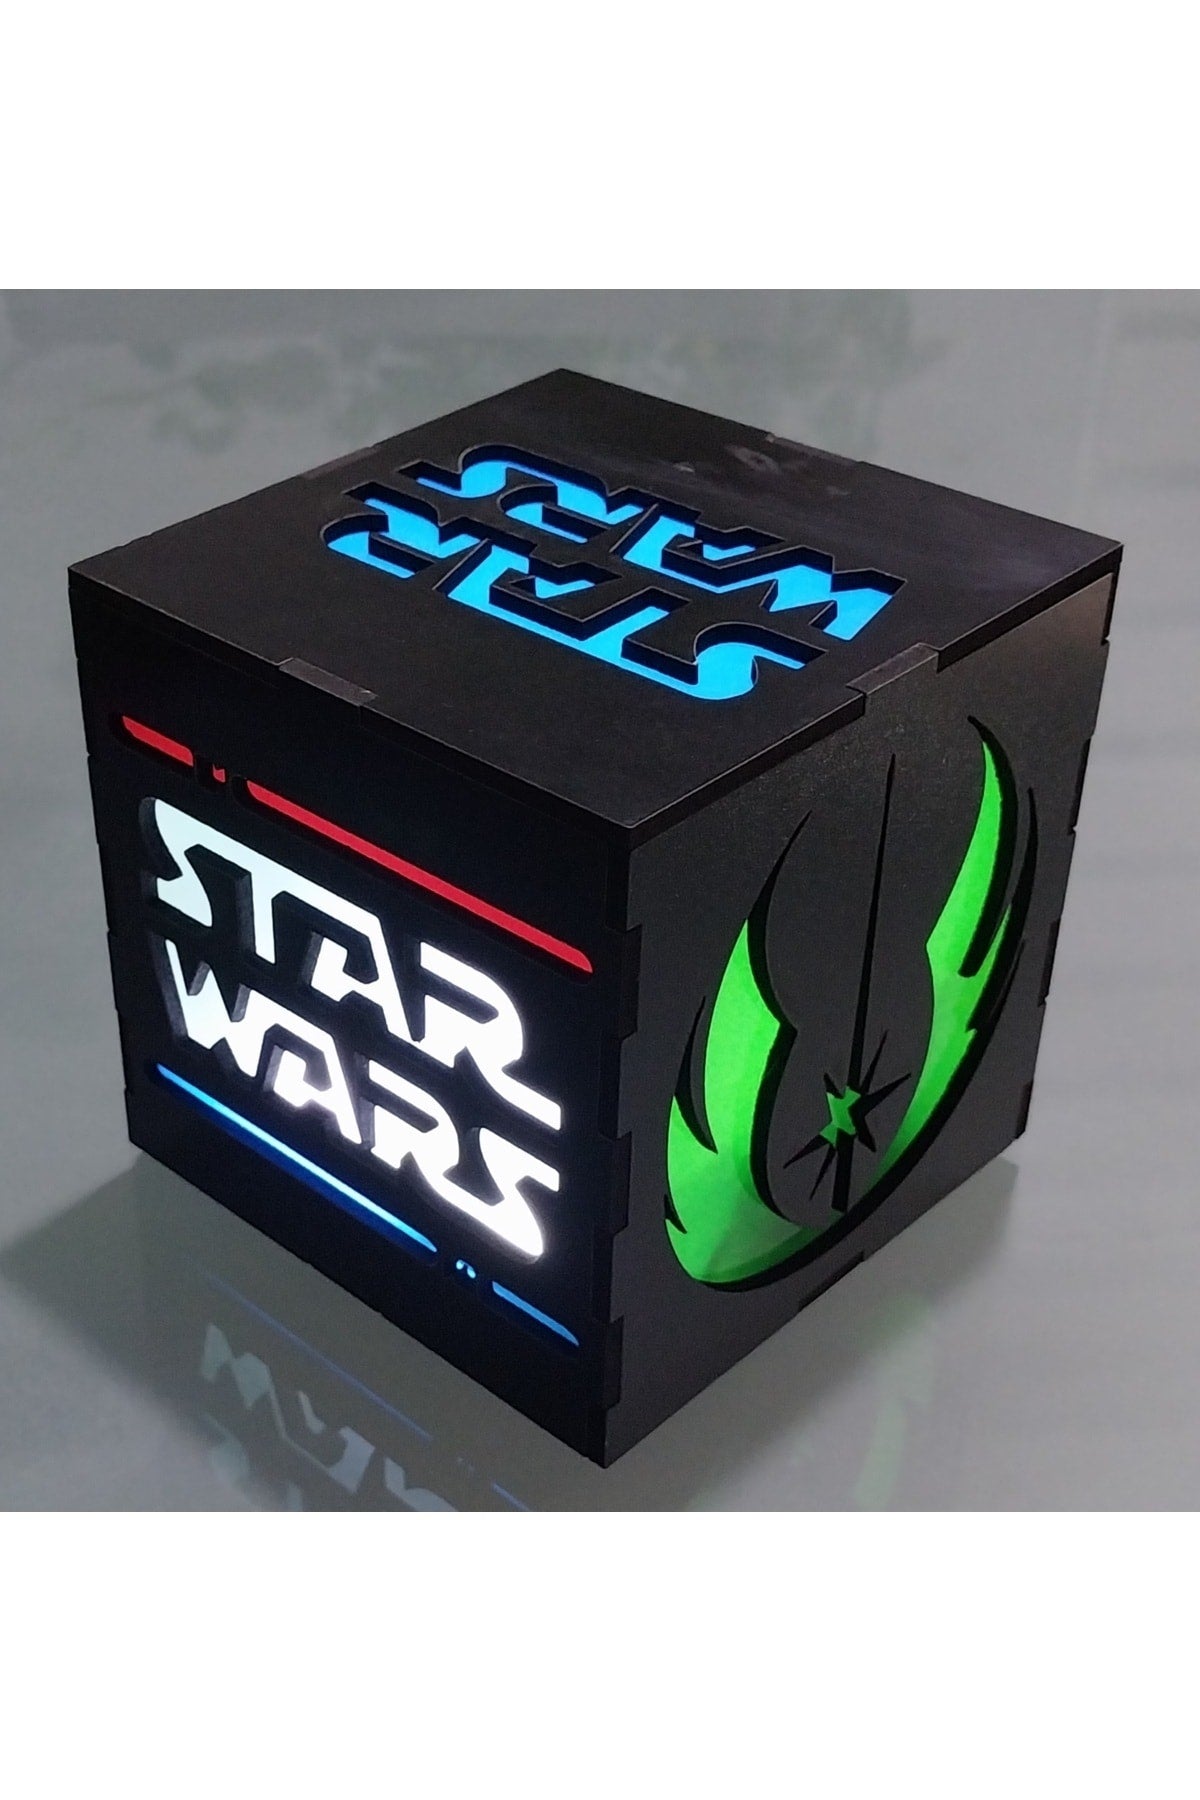 Star Wars Jedi Portable Lamp (LED LIGHT - BATTERY - WIRELESS) 9v Battery Included. A Great Gift.